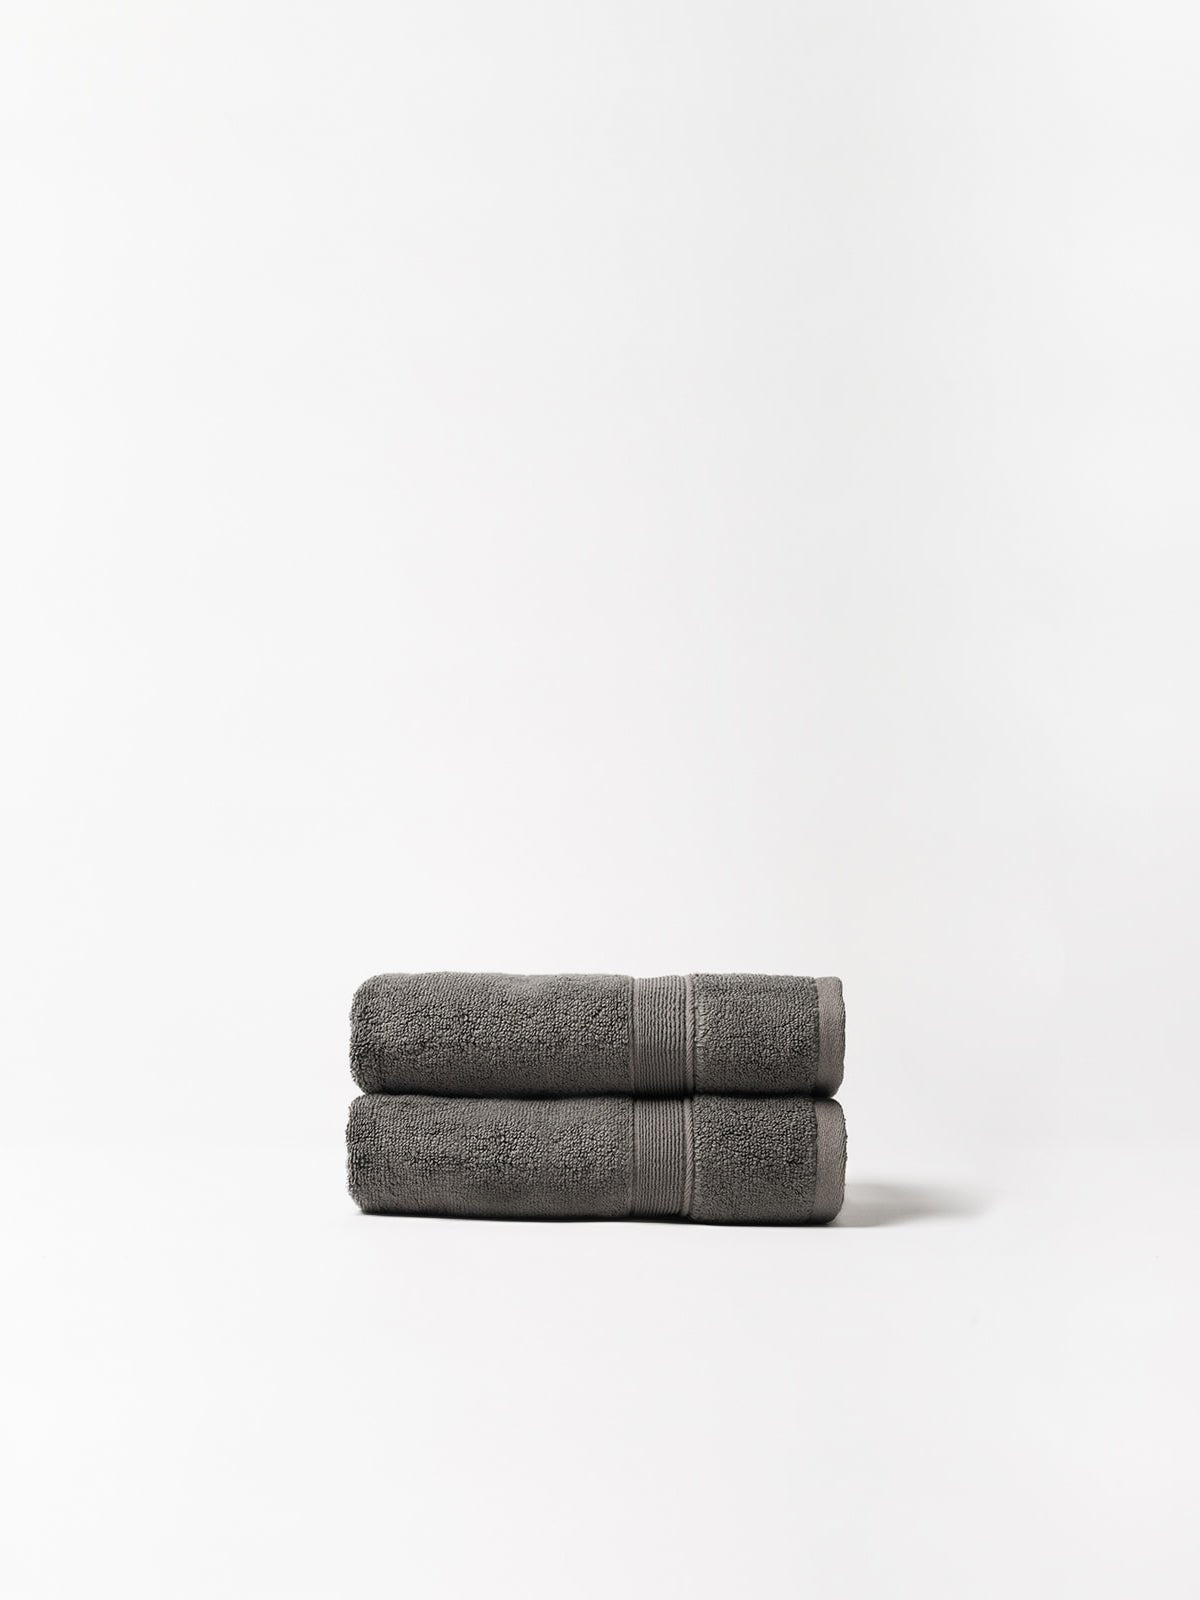 Charcoal hand towels folded with white background 